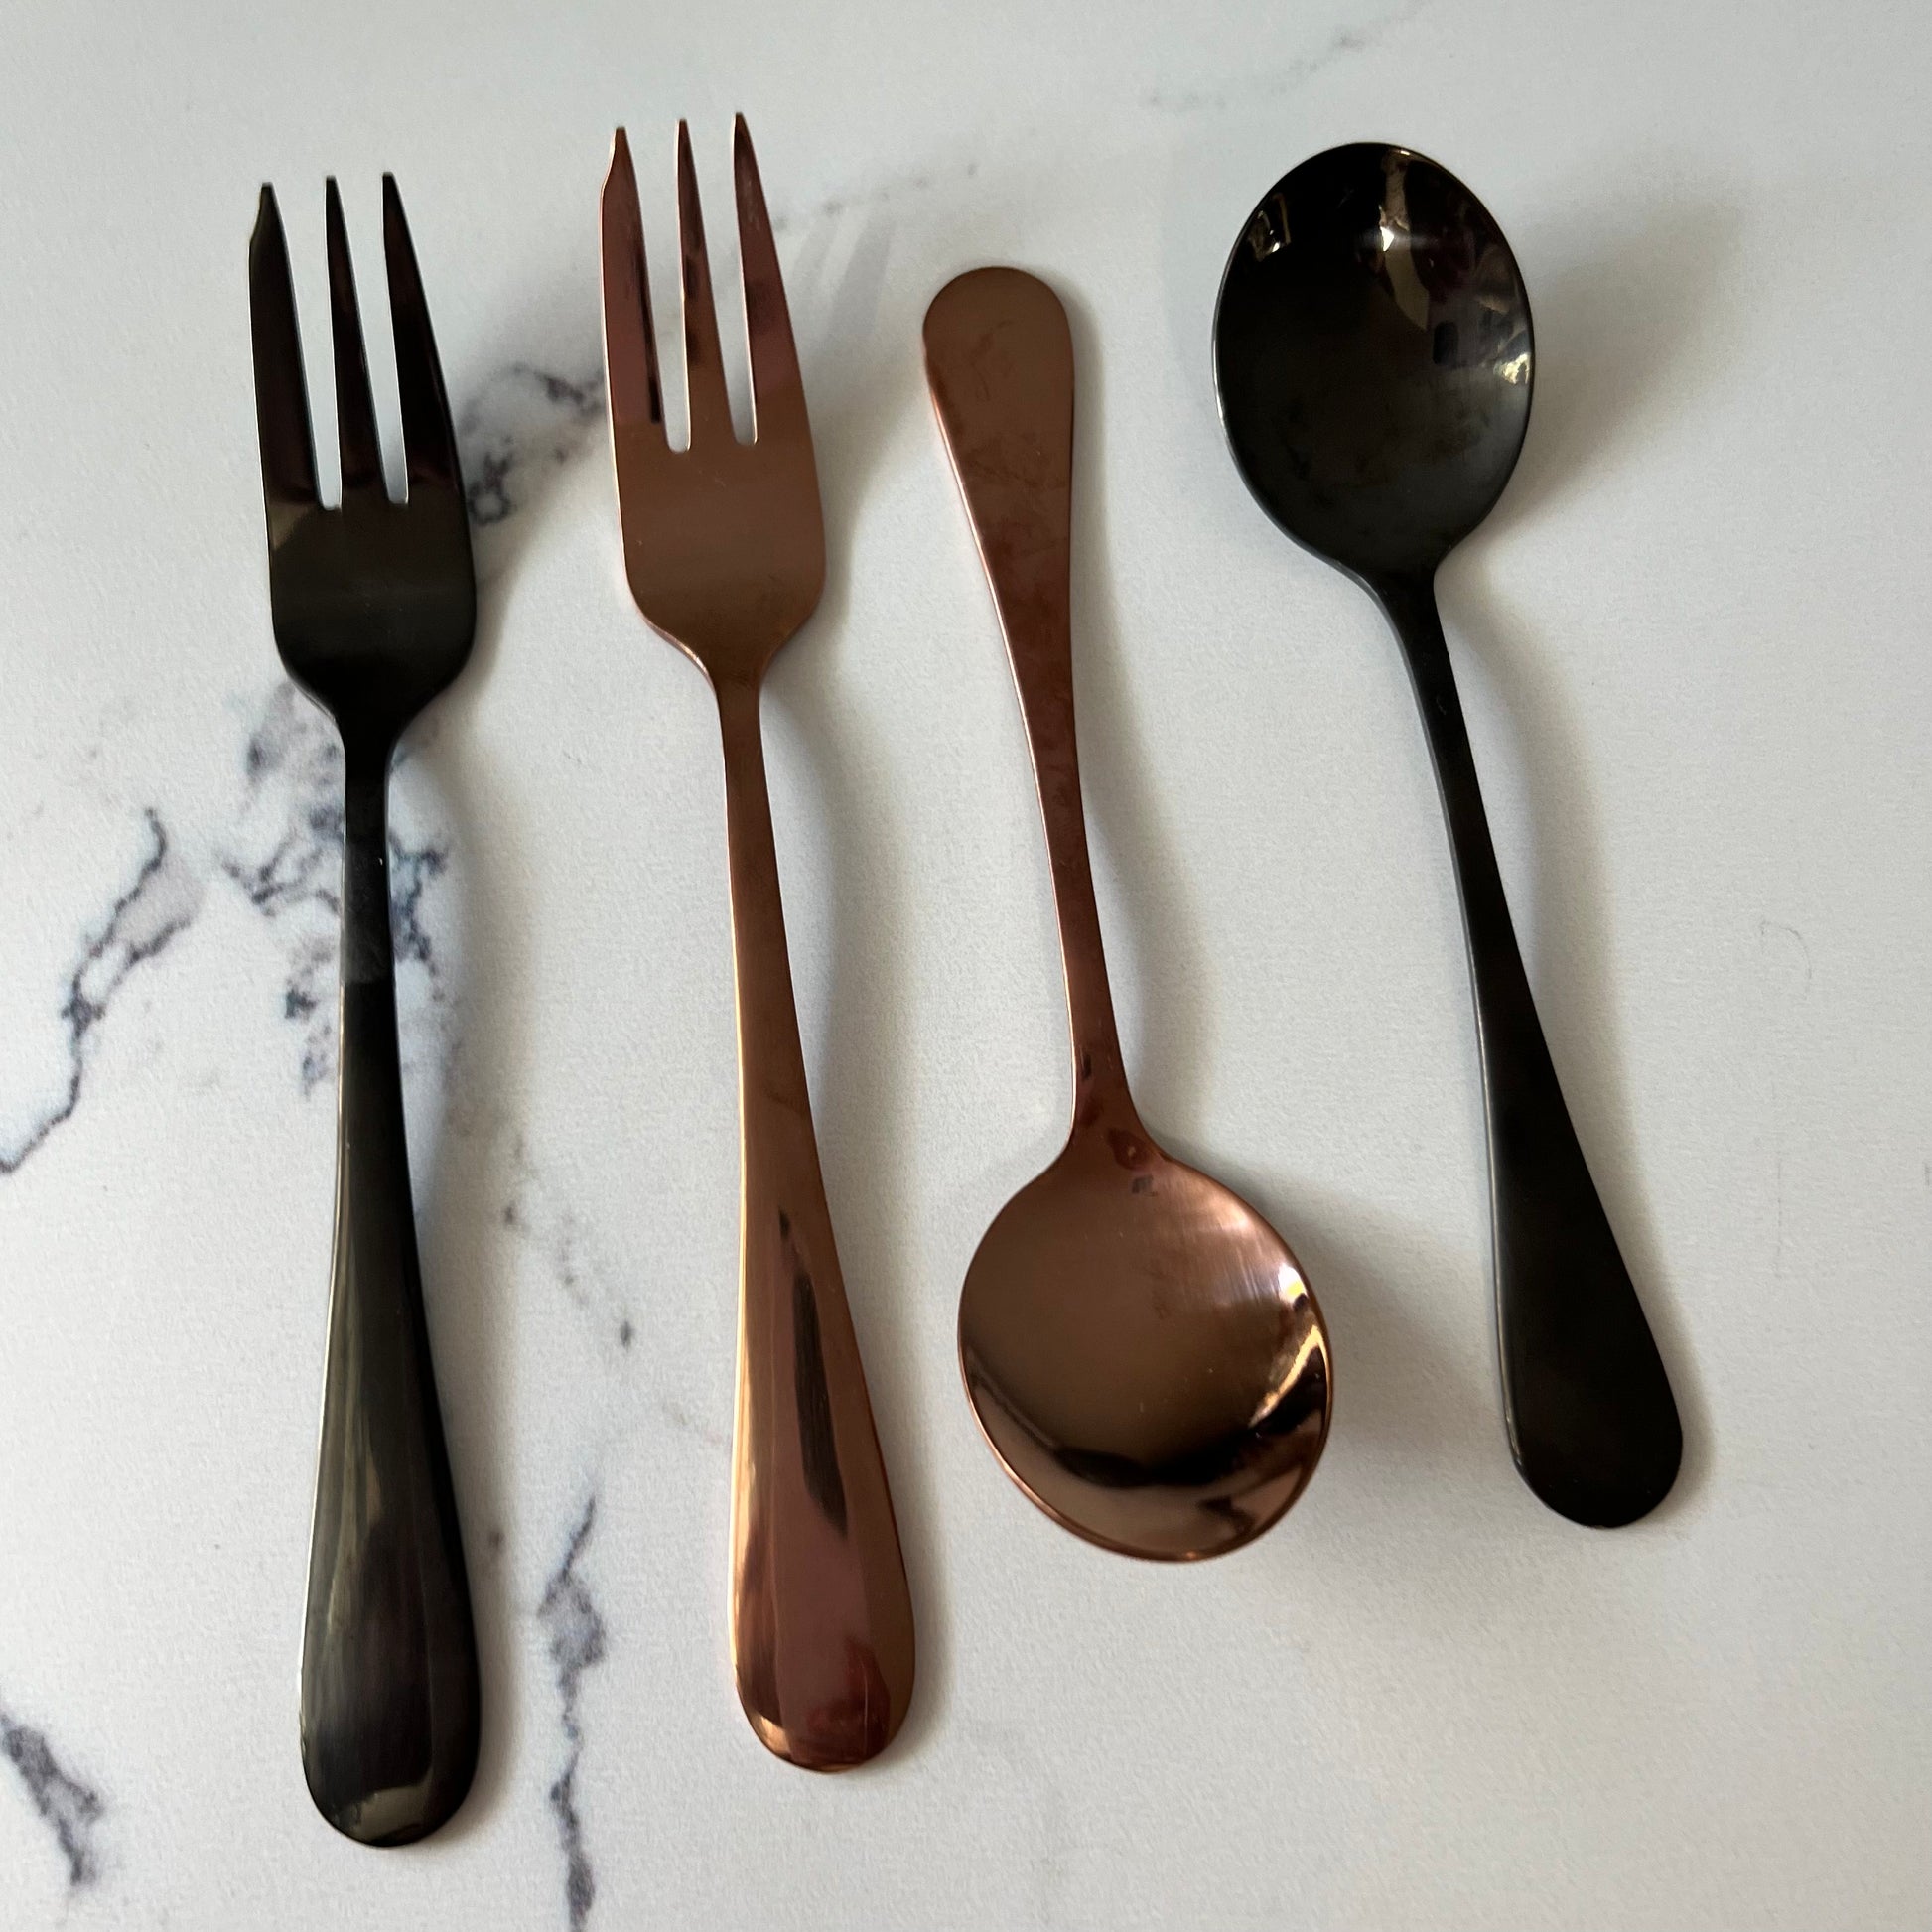 2 forks and 2 spoons arranged on a marble countertop.